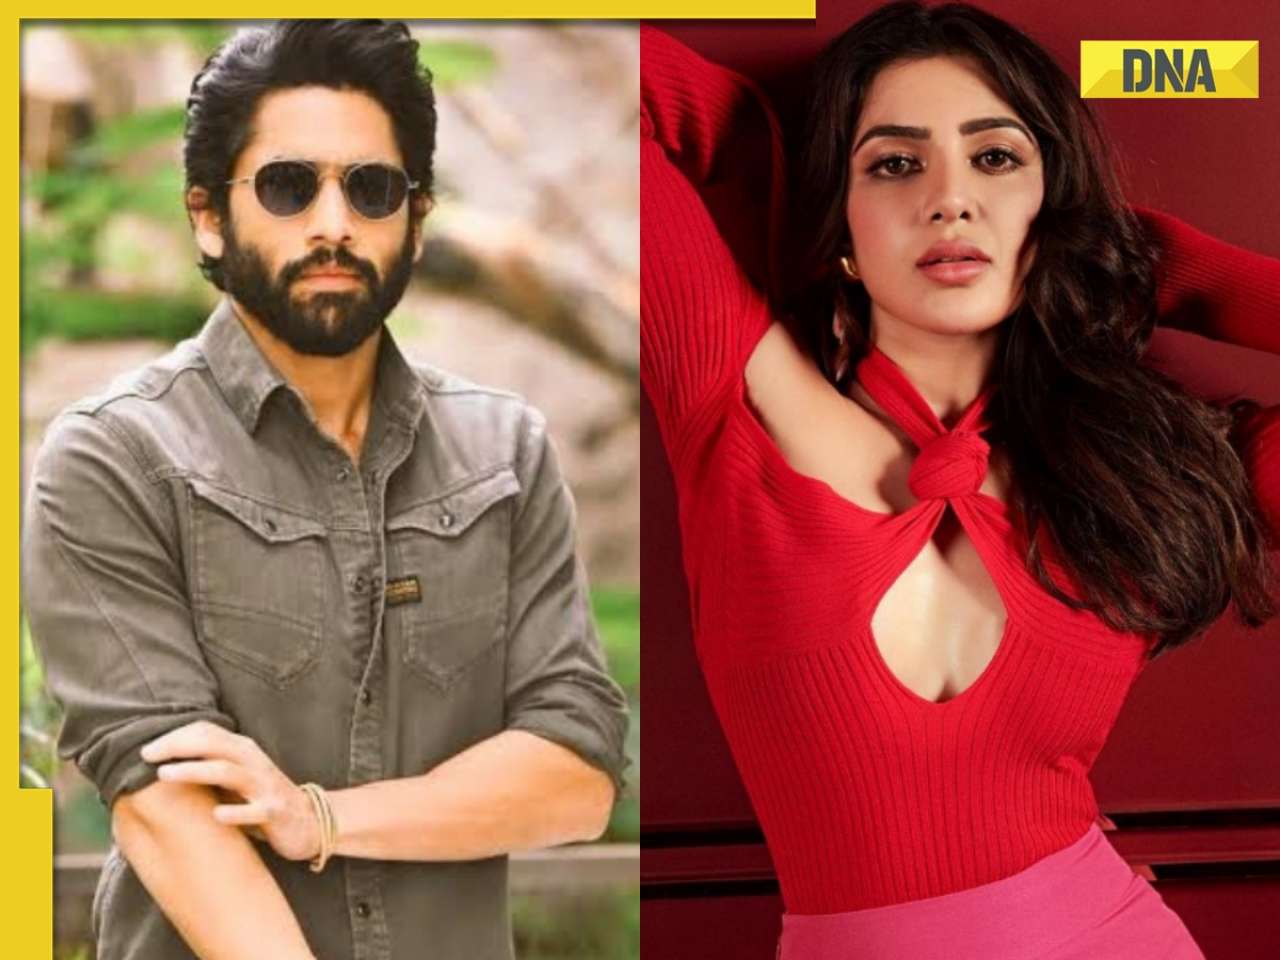 Did Naga Chaitanya confess to cheating on Samantha Ruth Prabhu? Old video of him saying he two-timed goes viral - Watch